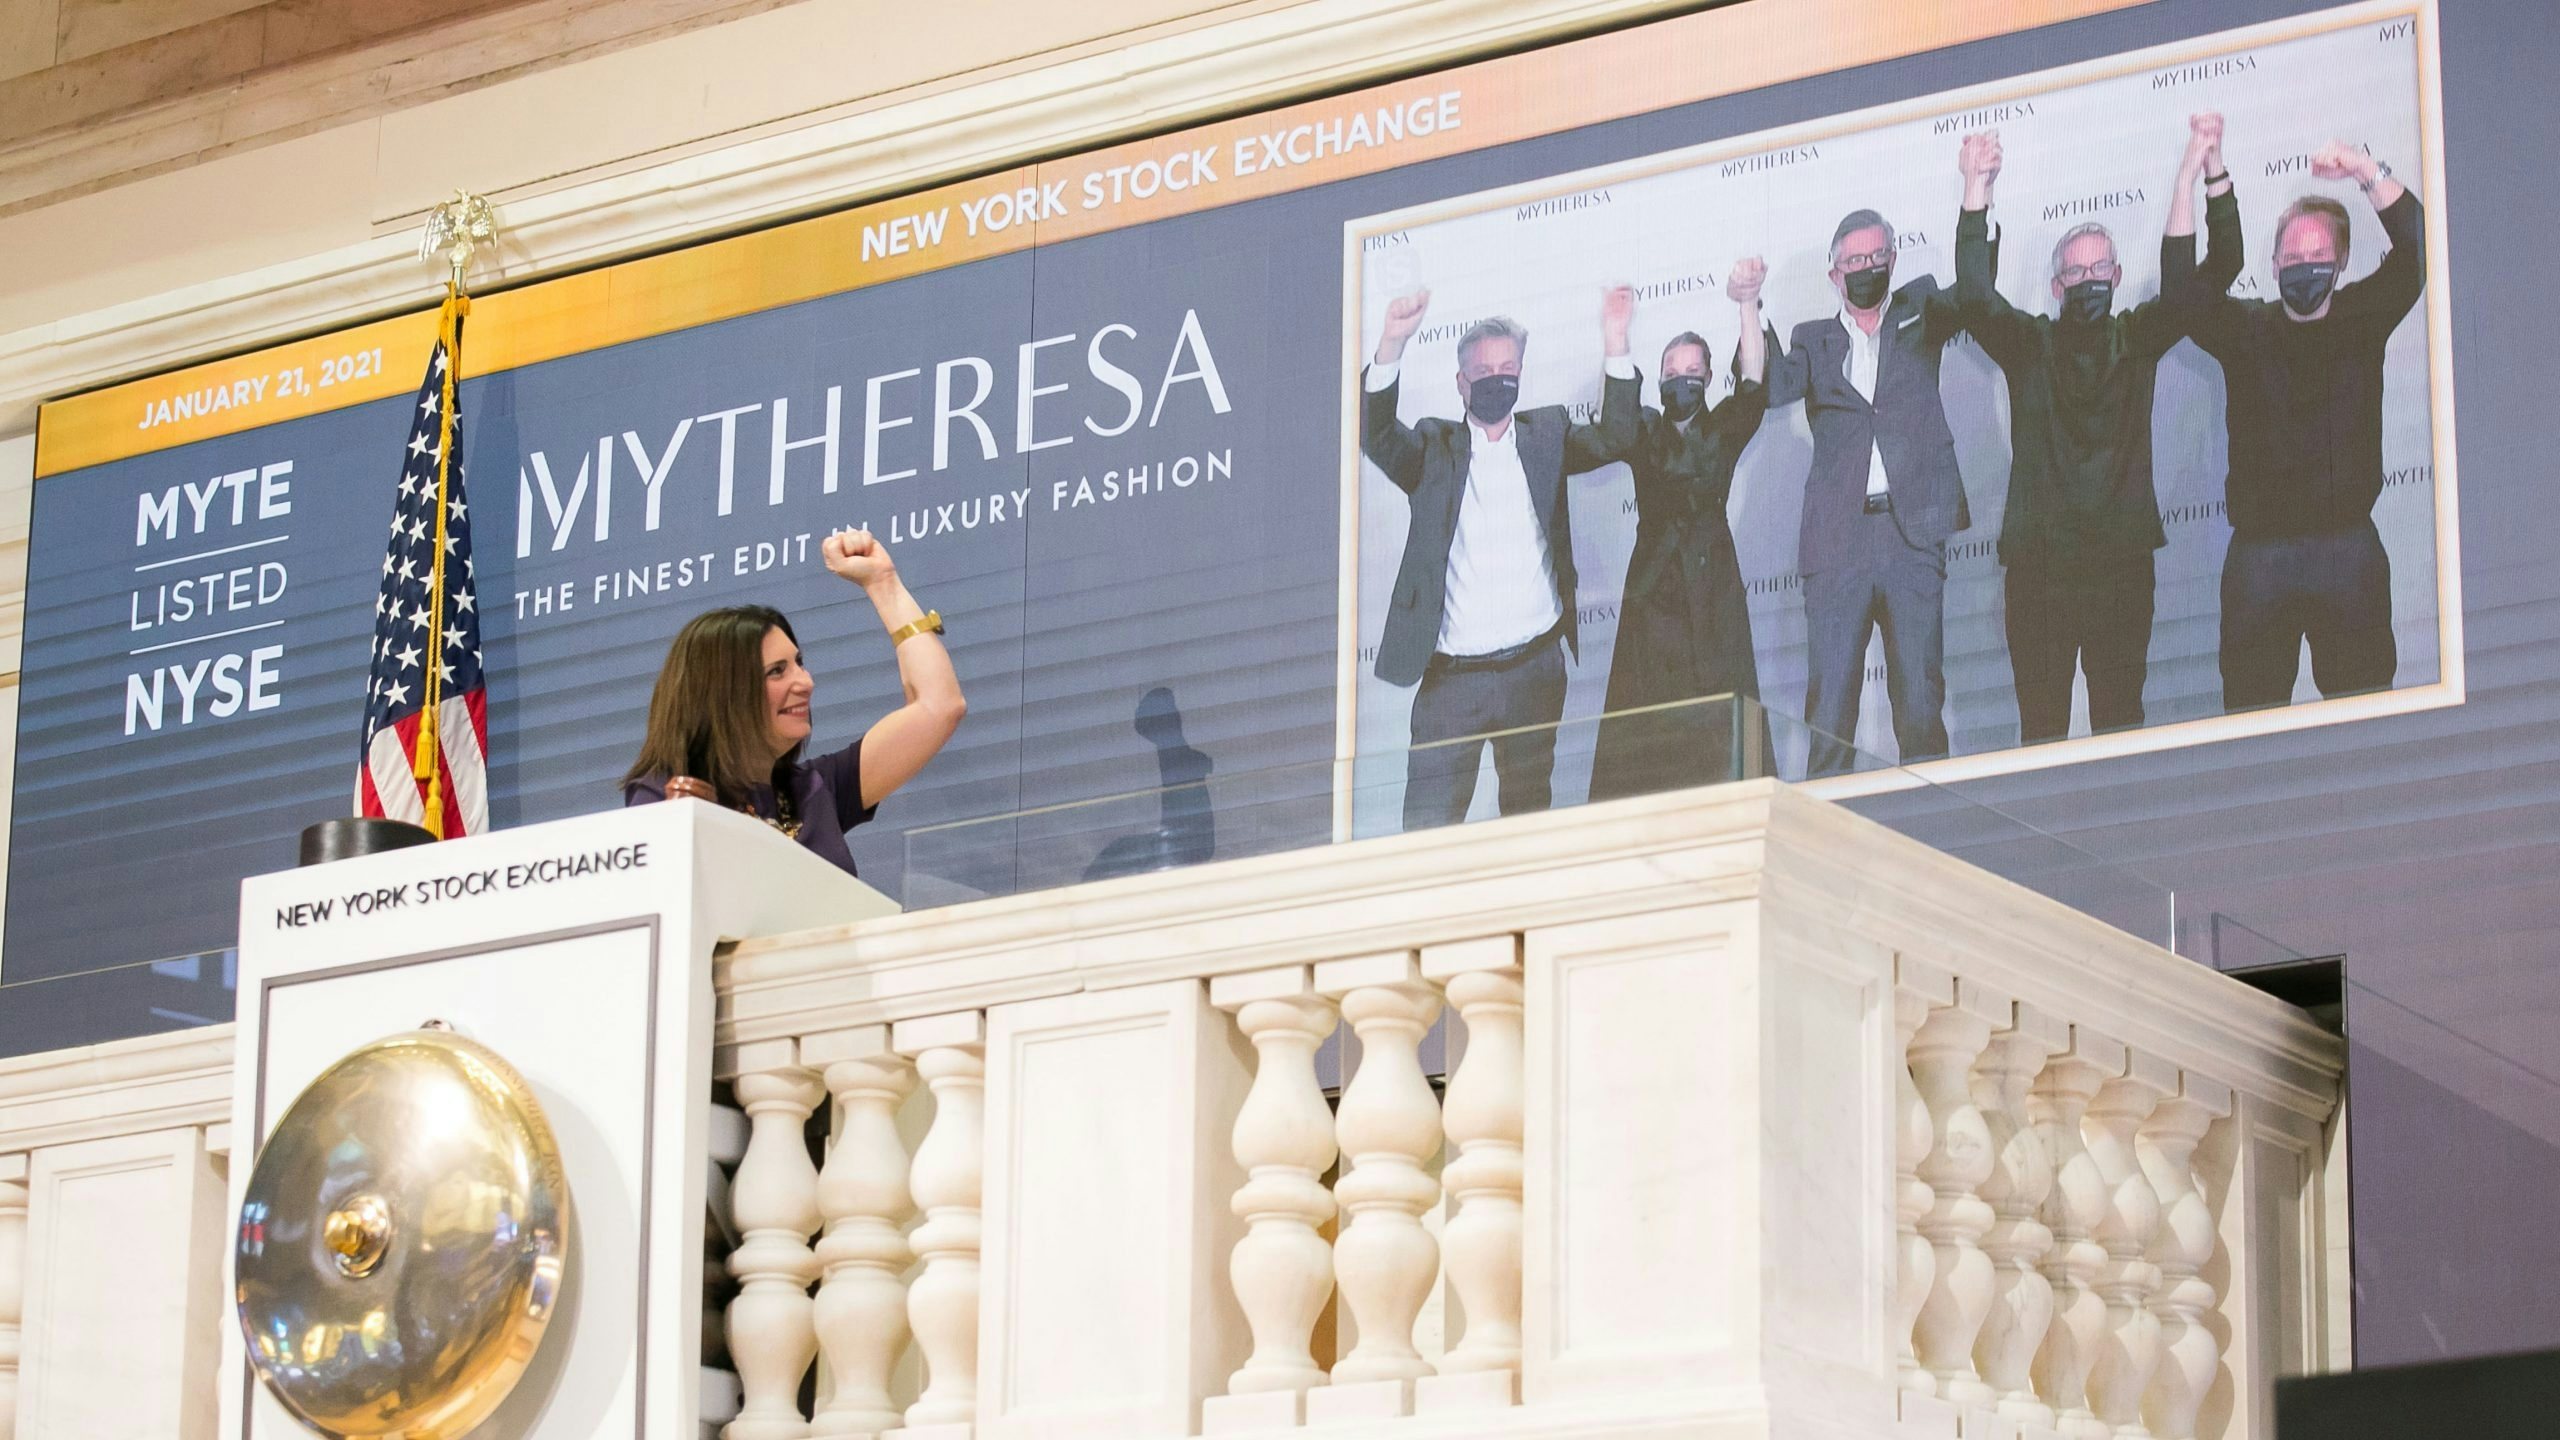 Luxury e-tailer Mytheresa raised $406.8 million in its long-awaited initial public offering. Now can it step up its game in China? Photo: NYSE